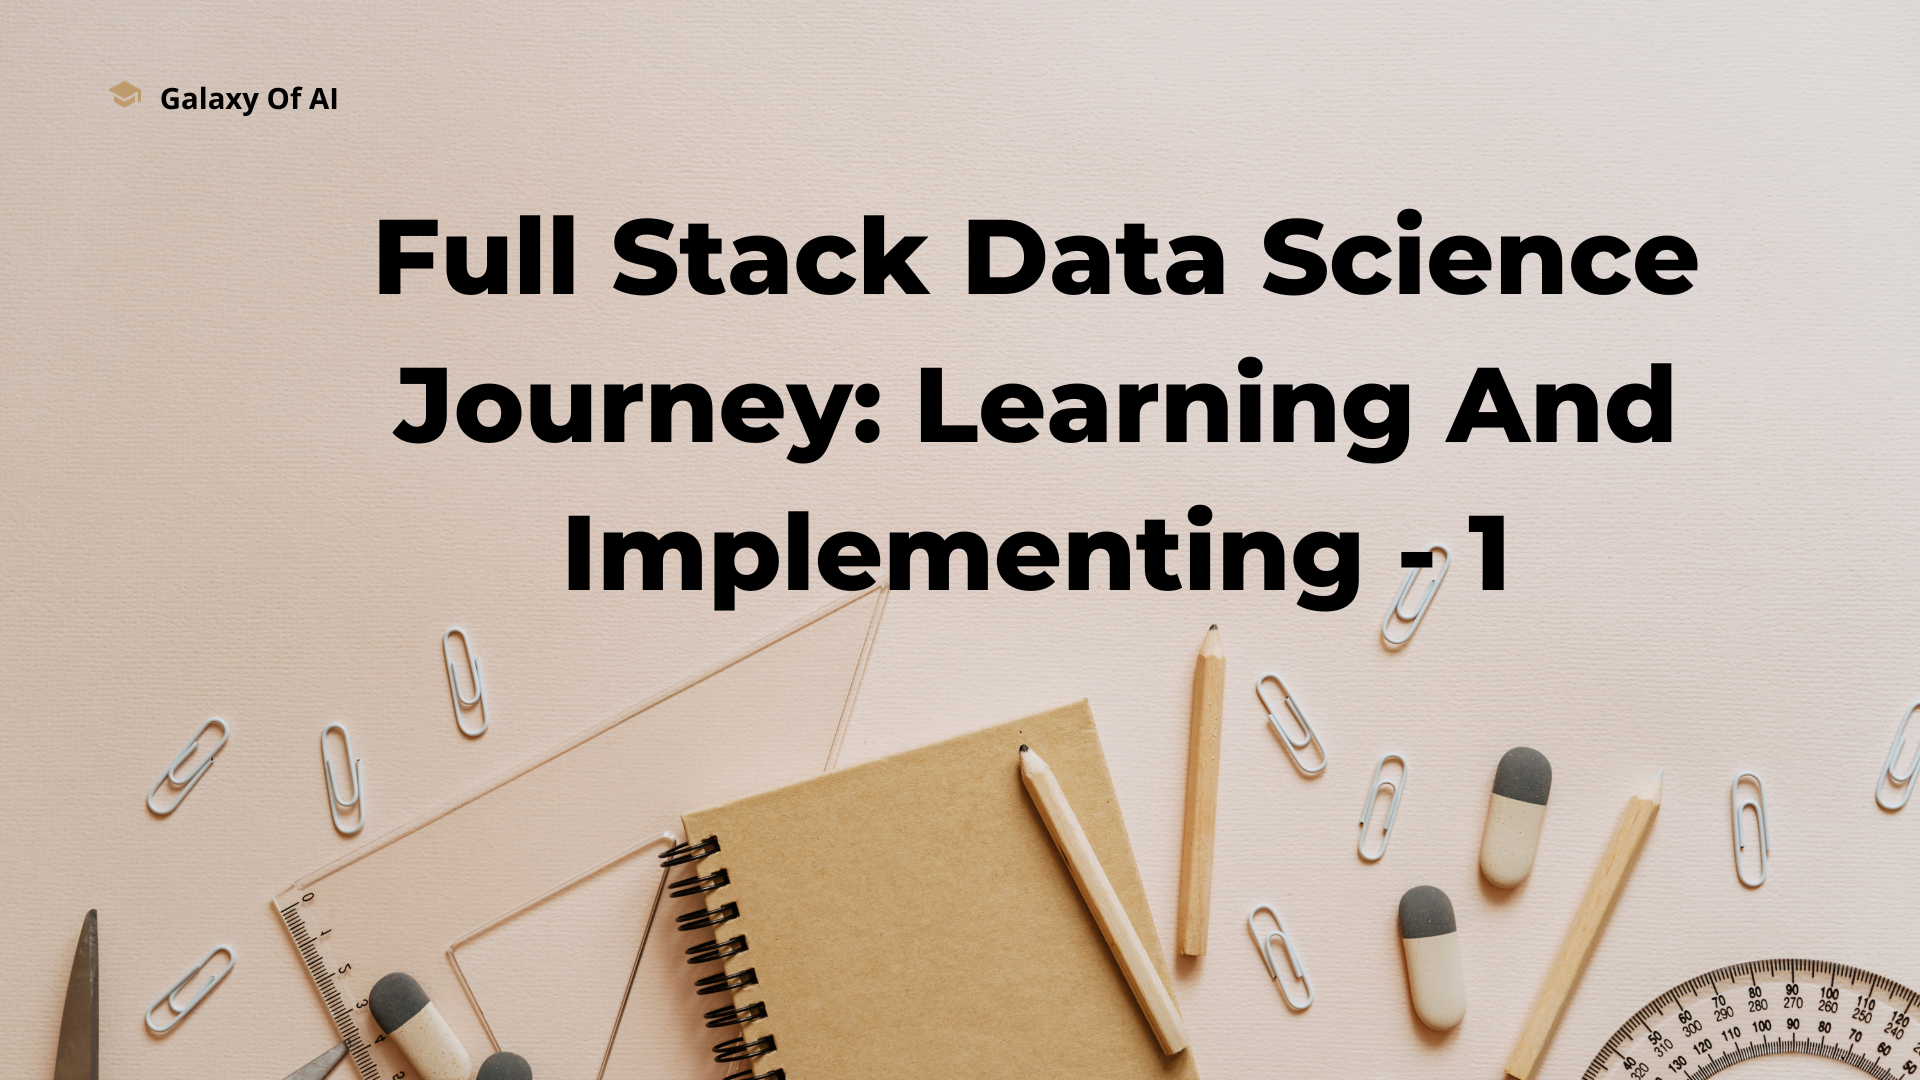 Full Stack Data Science Journey: Learning And Implementing - 1